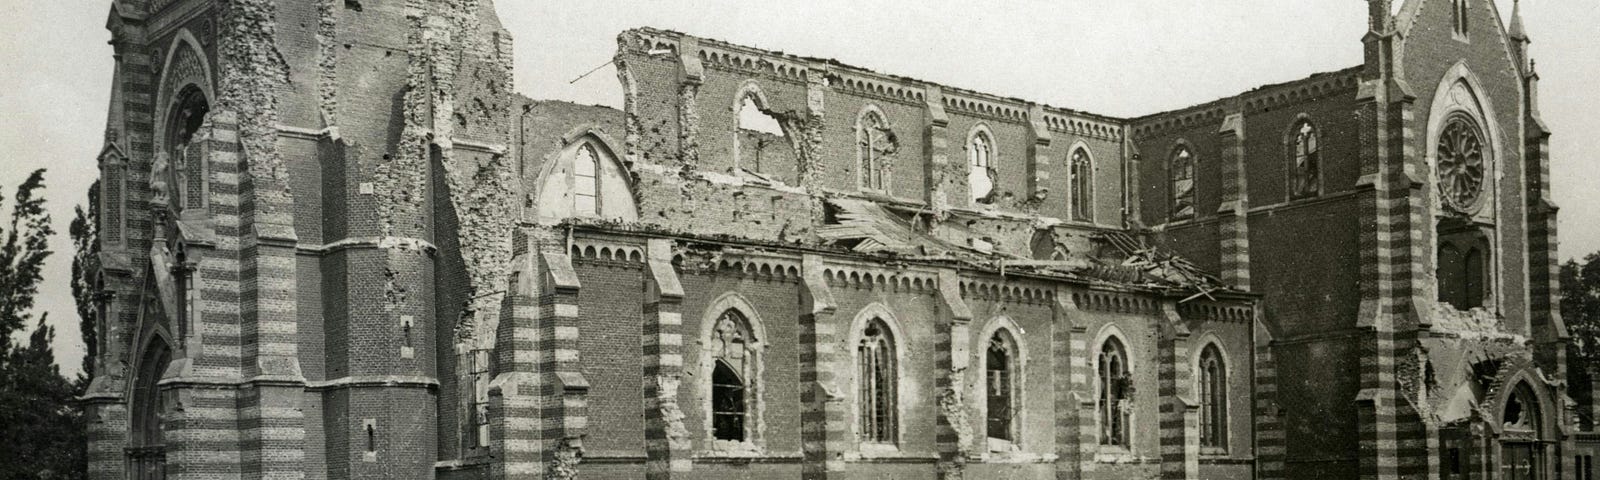 World War I soldiers gathered around the ruins of a heavily damaged church, highlighting the impacts of war on historical architecture.